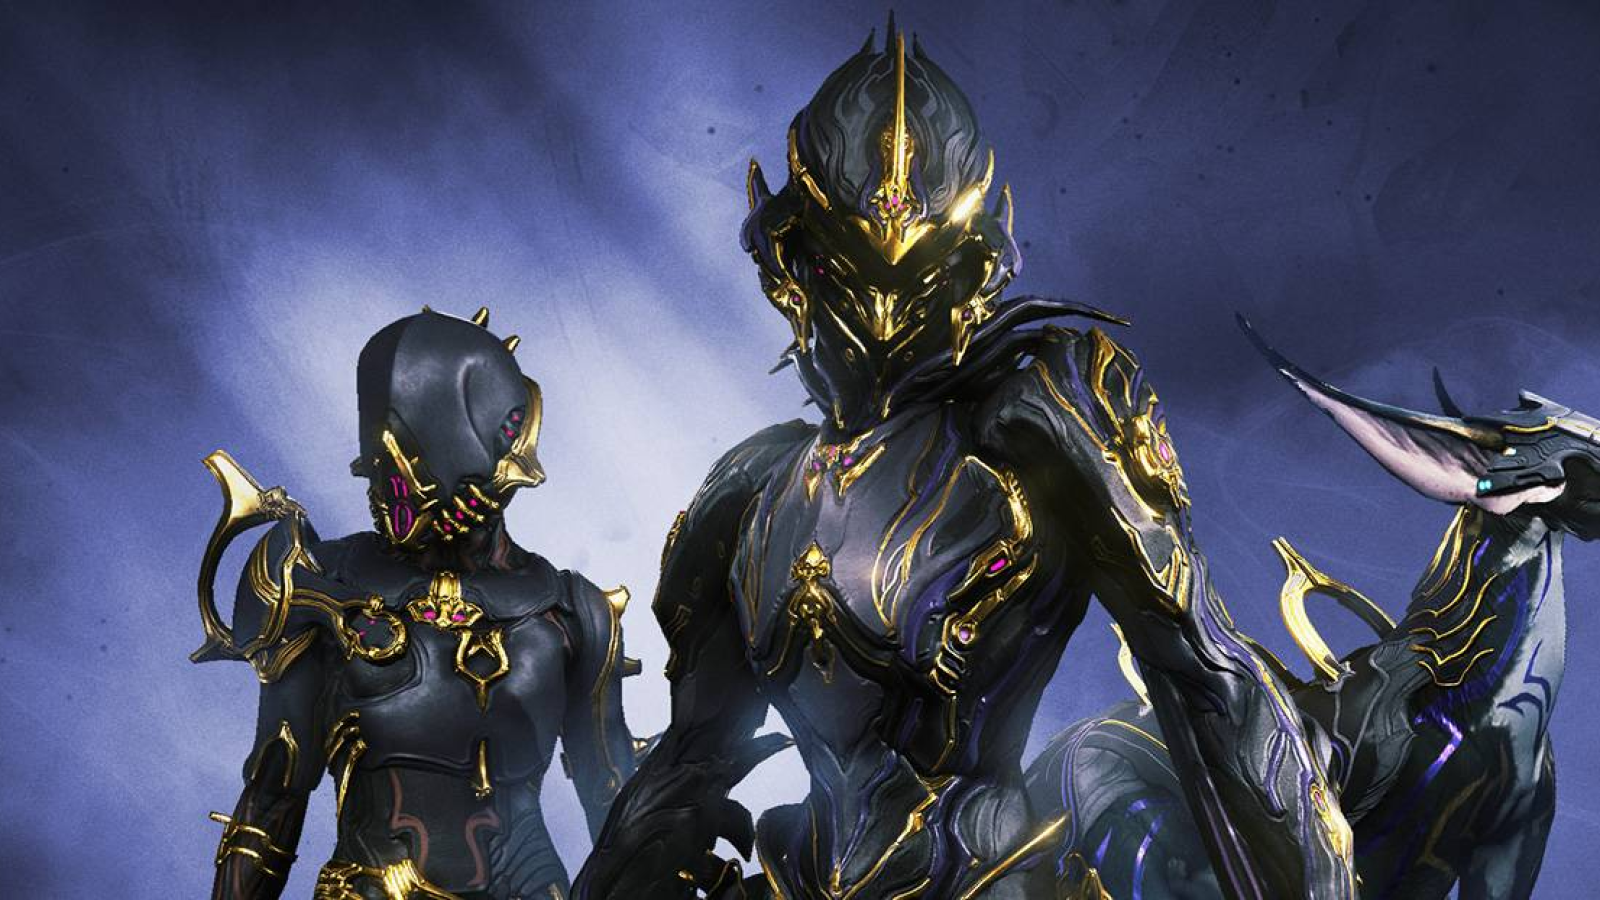 ZEPHYR PRIME ACCESS IS HERE!